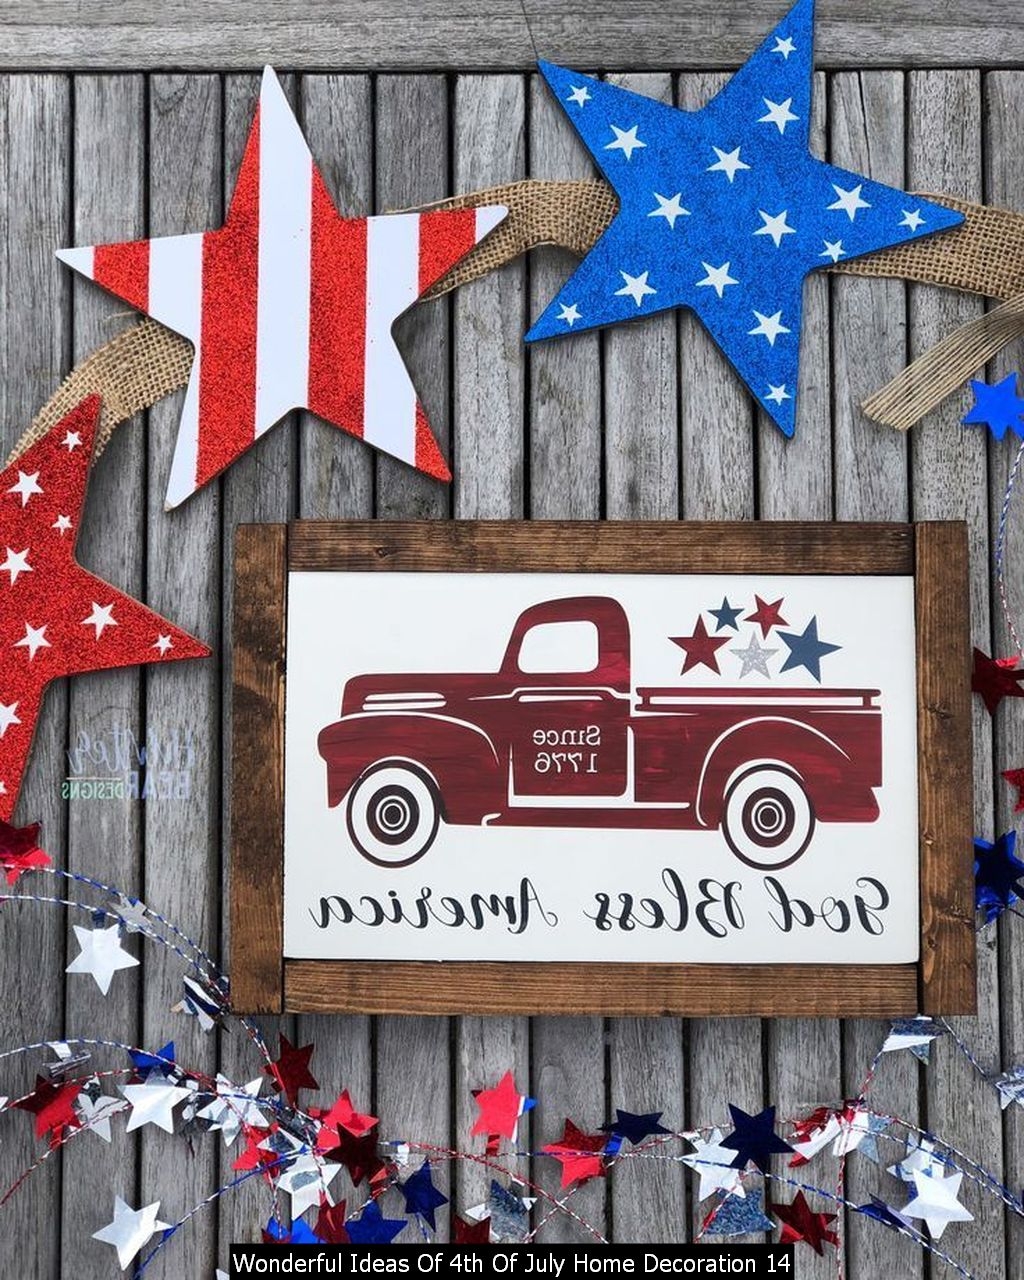 Wonderful Ideas Of 4th Of July Home Decoration 14